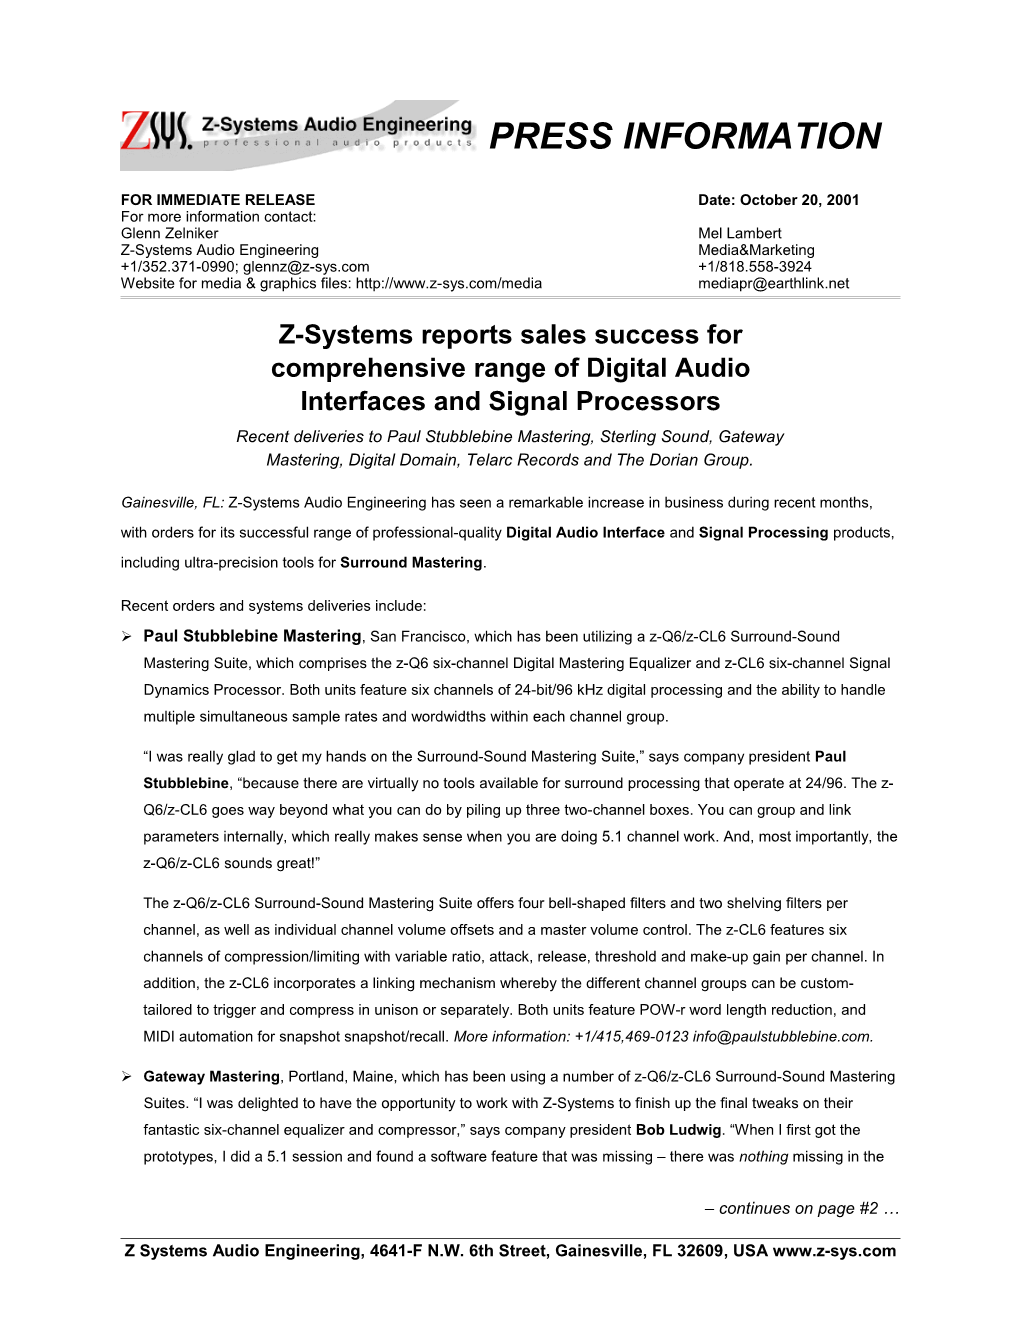 Z-Systems Reports Sales Success for Interfaces & Processors Page 2